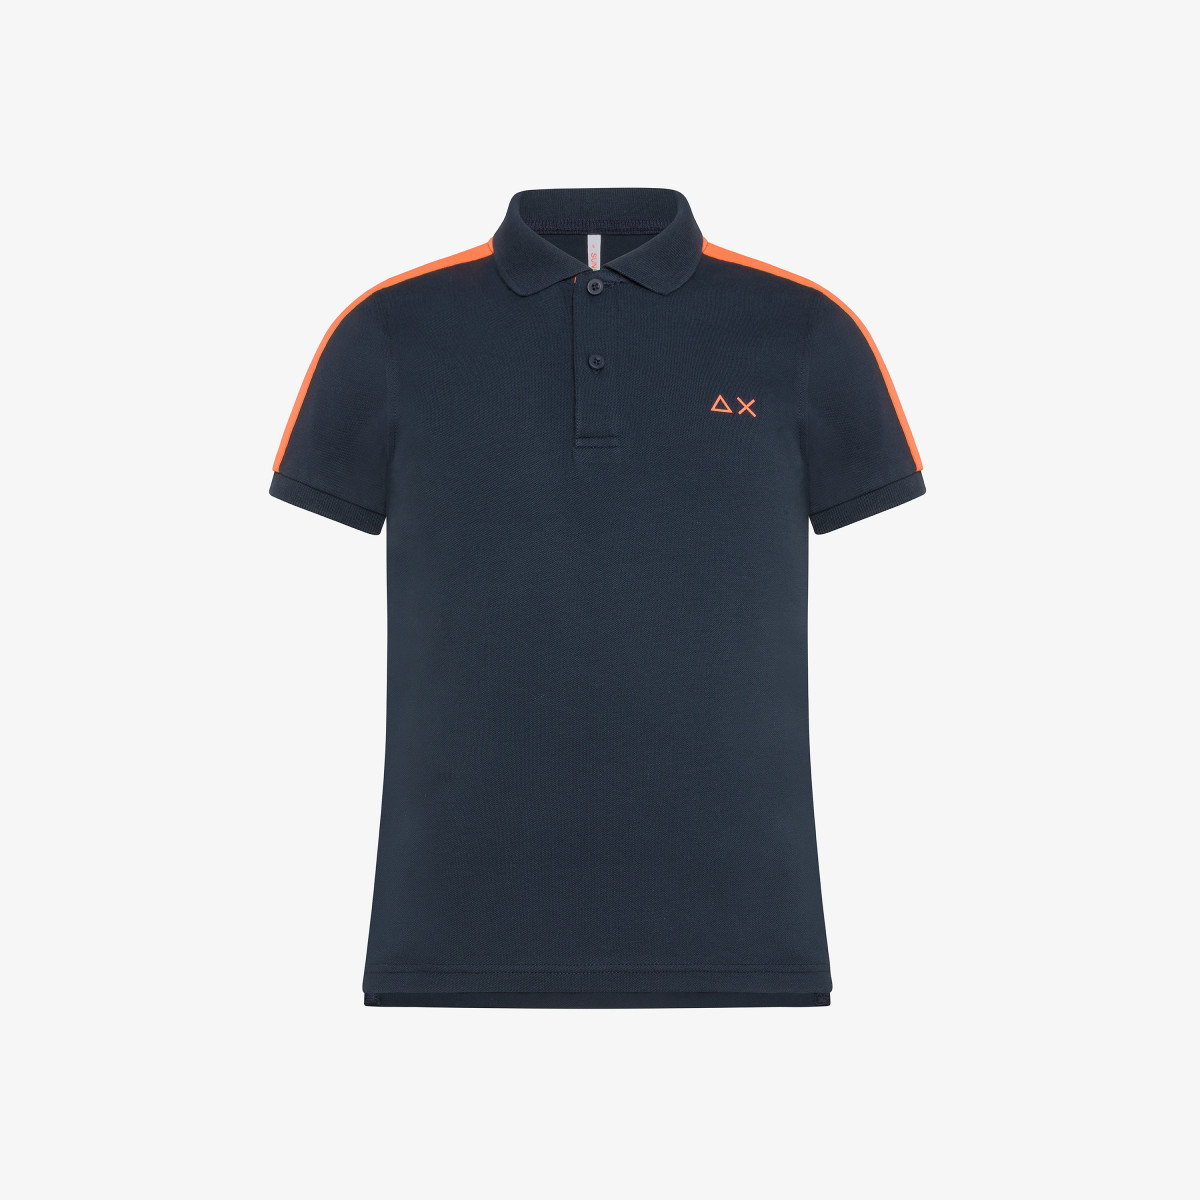 BOY'S POLO FLUO COLLECTION S/S NAVY BLUE